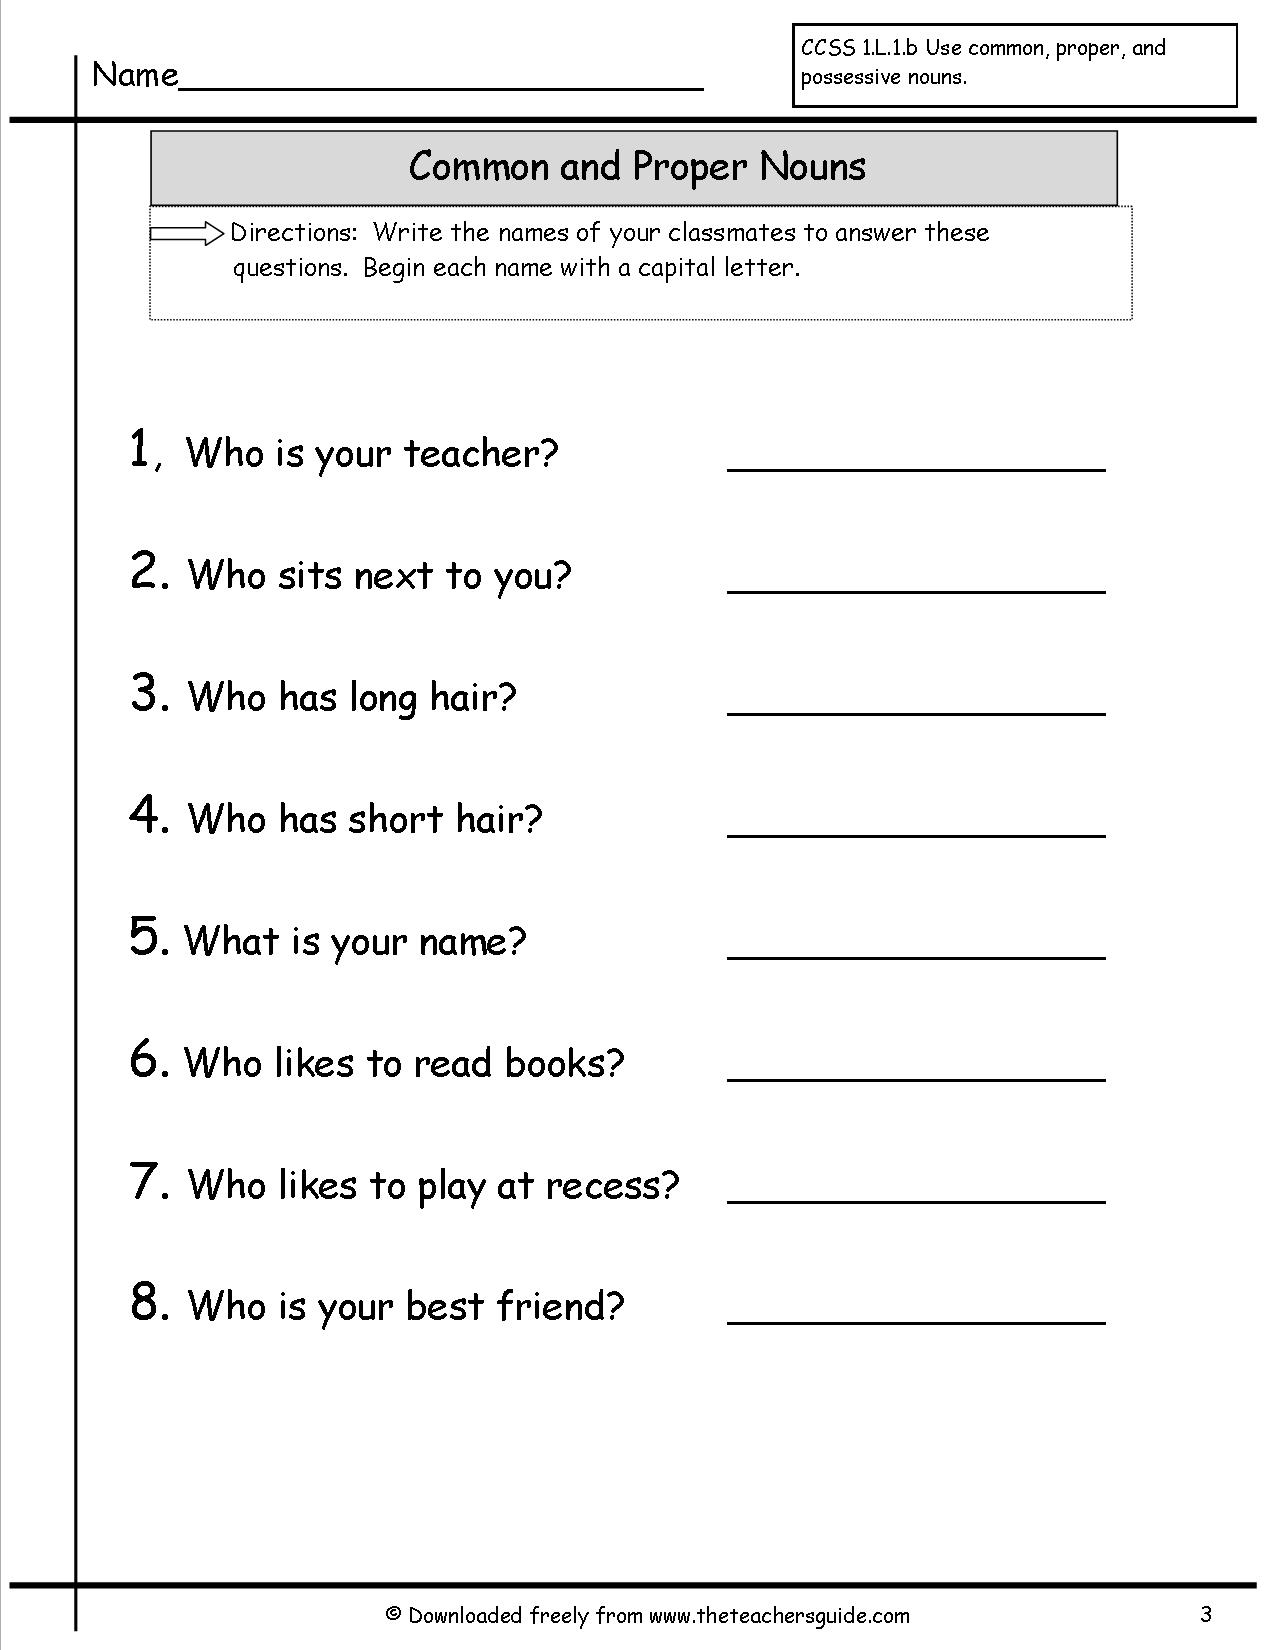 14-best-images-of-collective-noun-worksheet-2nd-grade-noun-worksheet-free-poetry-worksheets